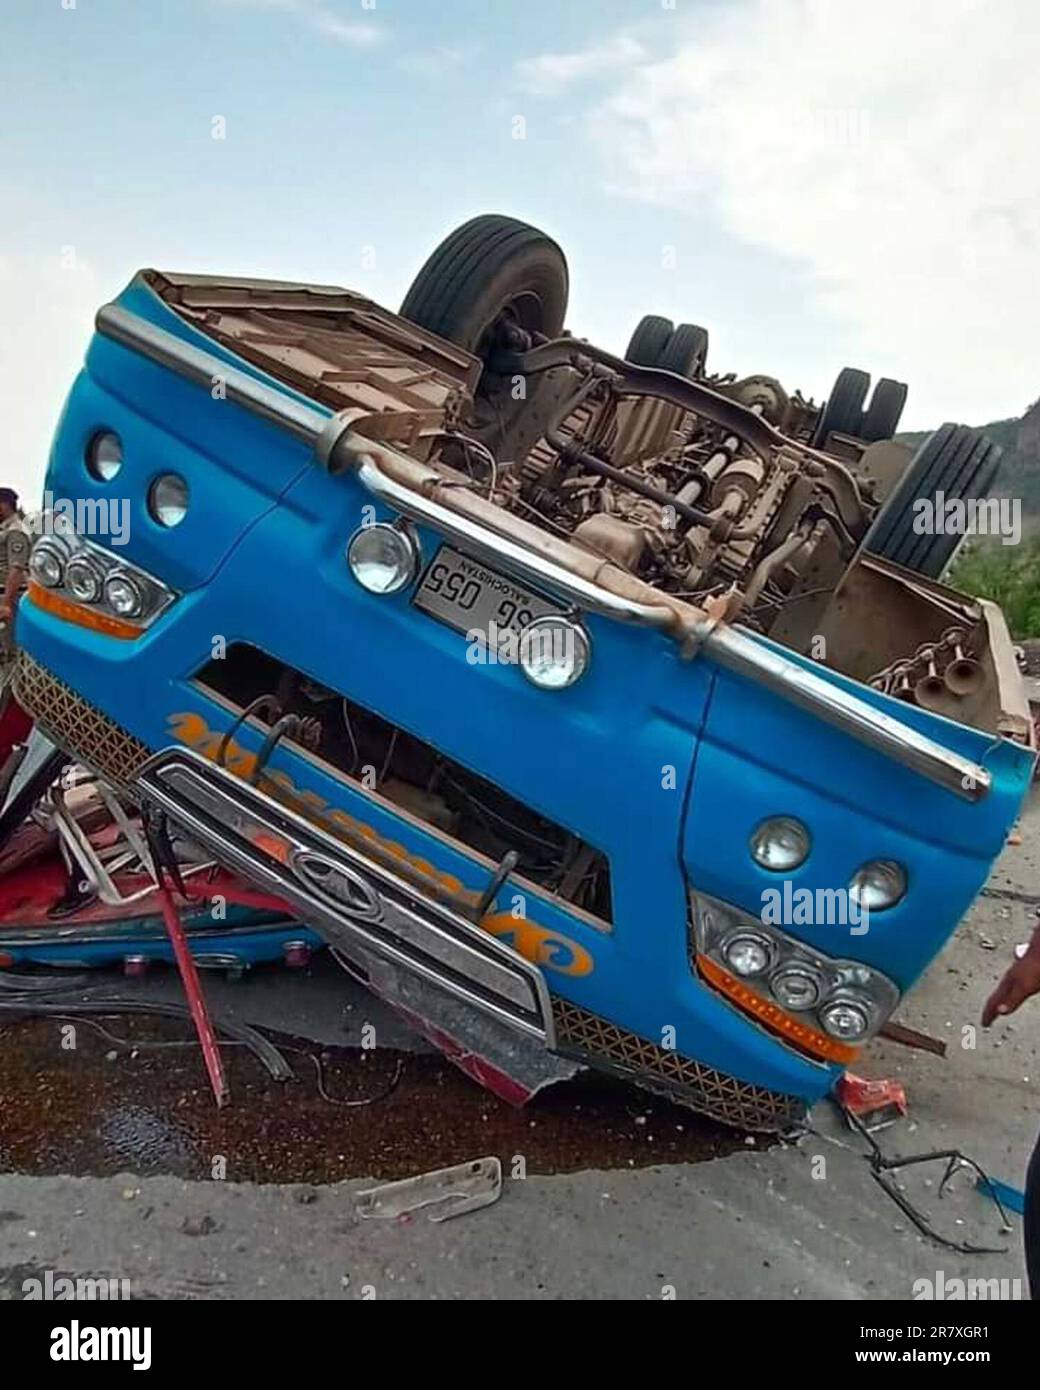 (230618) -- CHAKWAL, June 18, 2023 (Xinhua) -- An overturned passenger bus is pictured at a road accident site in Chakwal district of Pakistan's eastern Punjab province on June 17, 2023. At least 14 people were killed and over 20 others injured when a passenger bus turned turtle in Chakwal district of Pakistan's eastern Punjab province on Saturday, police officers said. The accident took place on the motorway near Kallar Kahar area of the district when the driver of the bus lost control of the vehicle due to brake failure, leading to the tragic crash, Deputy Inspector General of National Highw Stock Photo